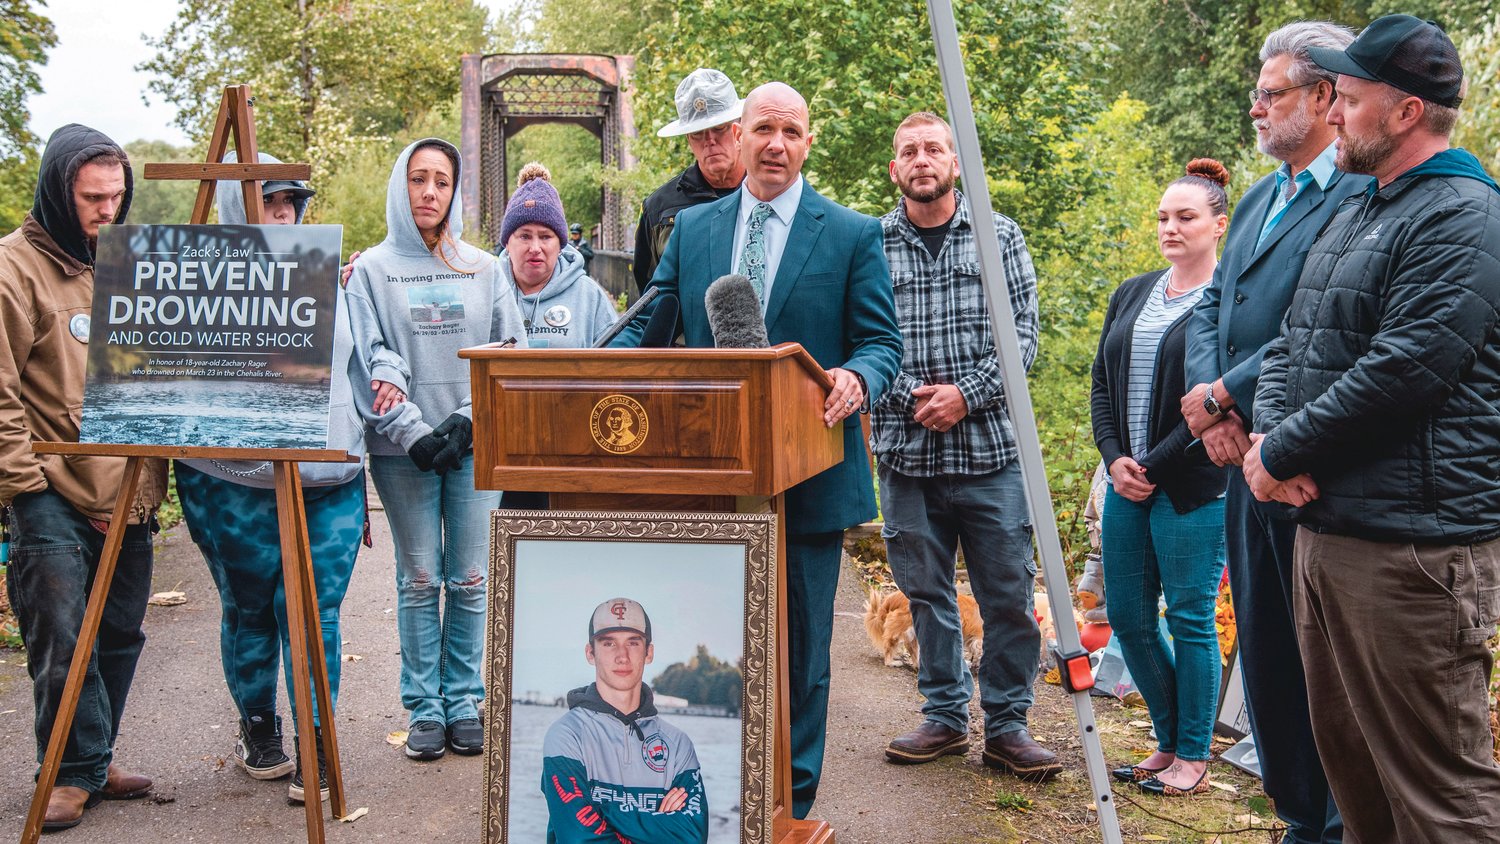 Rep. Peter Abbarno says “Zack’s Law will save lives,” during a press conference announcing upcoming legislation named in honor of Zachary Rager with a goal of raising awareness around cold water shock to prevent drownings, Wednesday near the Adna trestle along the Willapa Hills Trail.